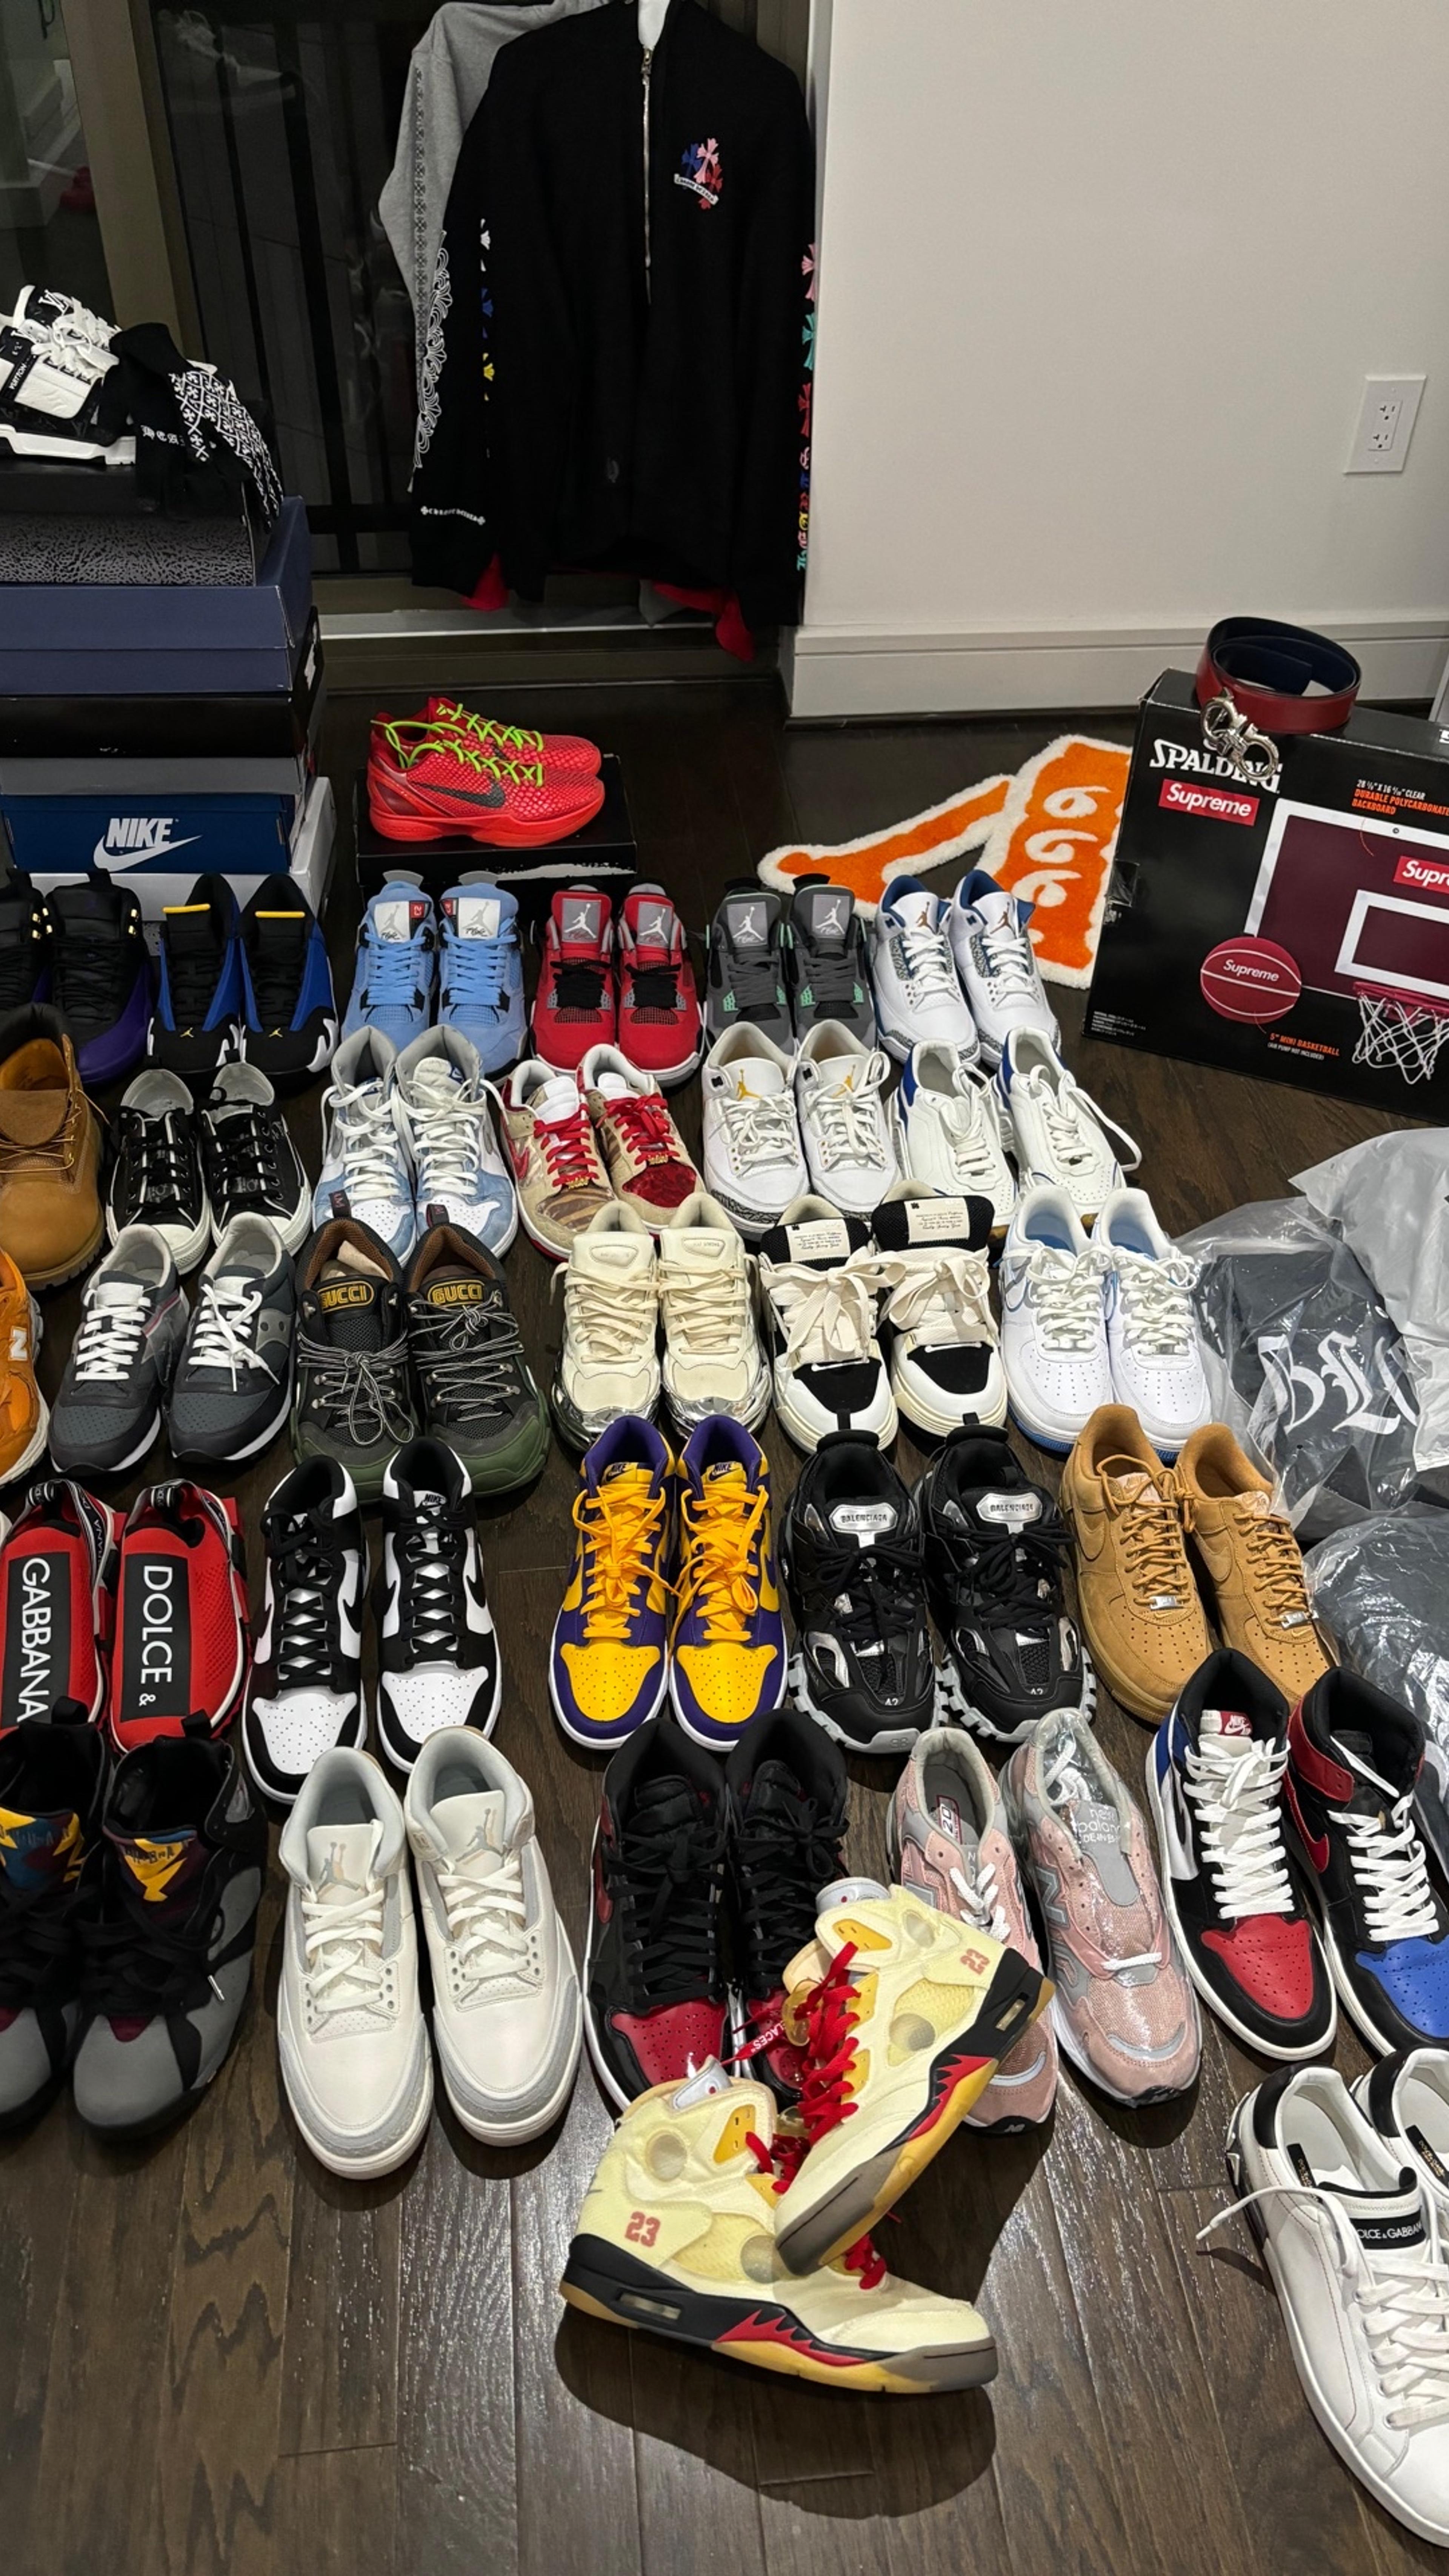 Preview image for the show titled "$1 Koby & many more shoes starting at $1 🔥" at May 16, 2024